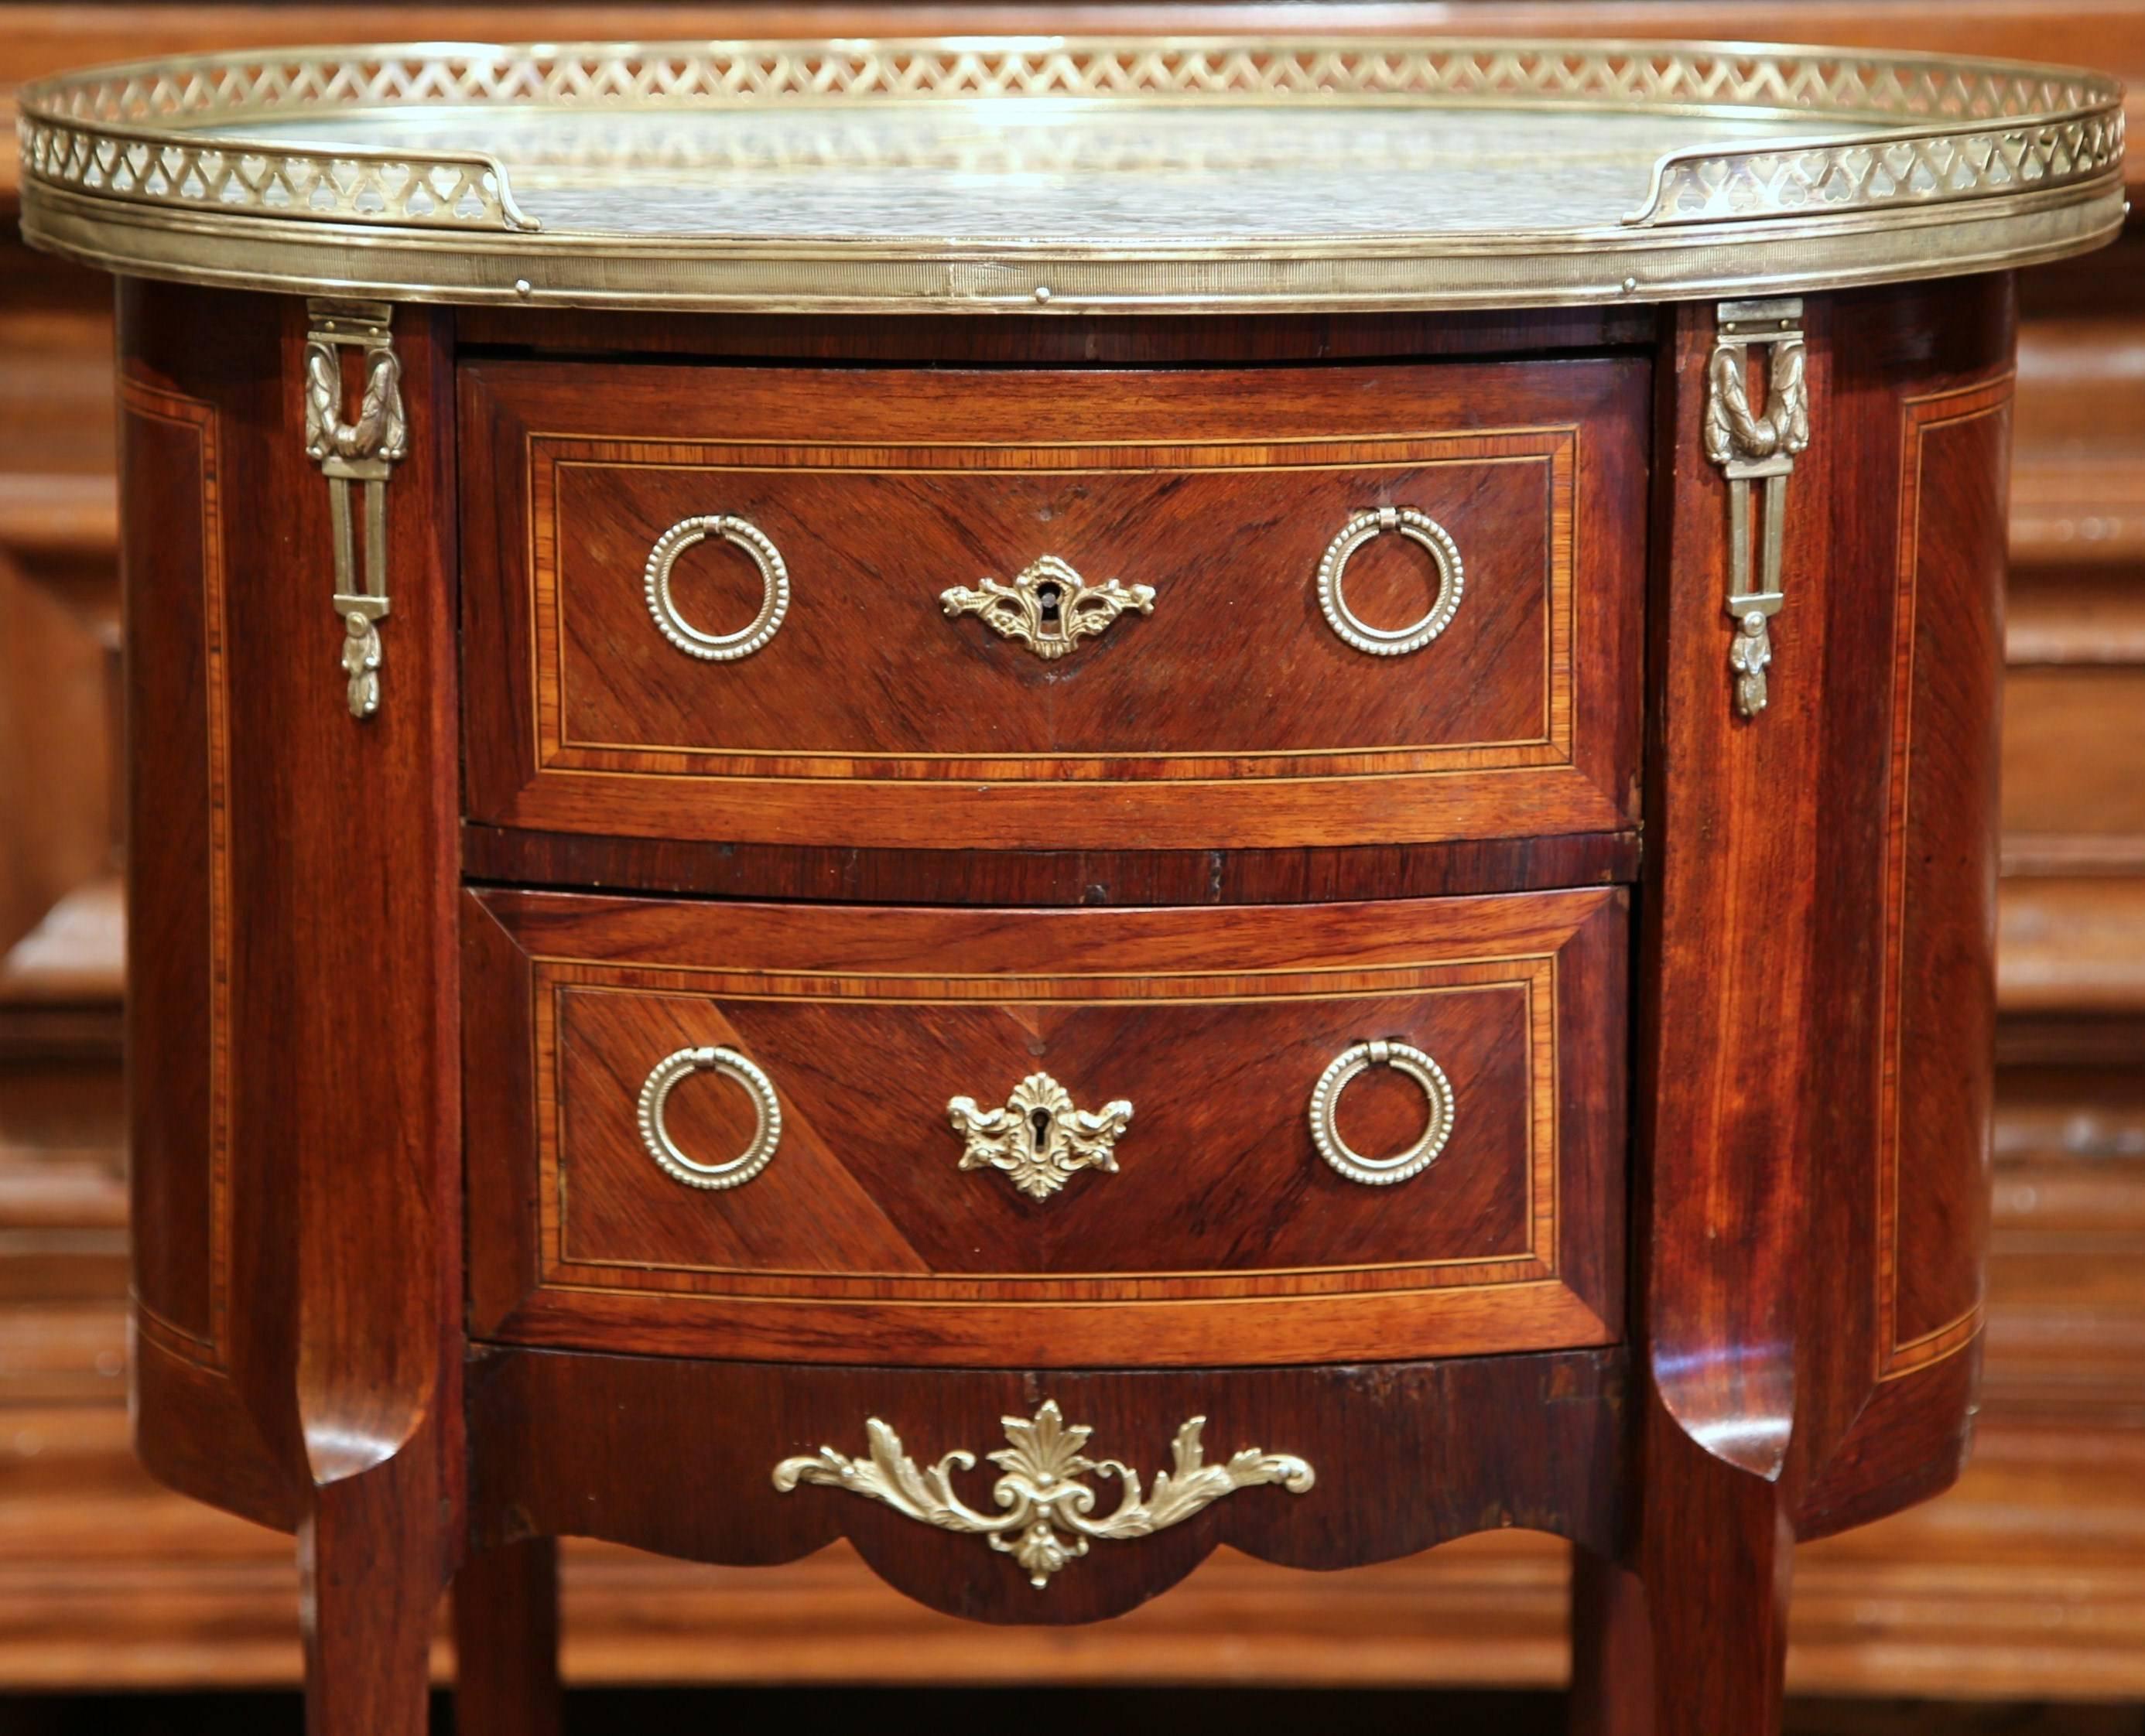 This small, antique oval chest of drawers was crafted in Paris, France, circa 1870. The elegant commode has its original grey marble top with a decorative brass gallery around the periphery. There is beautiful marquetry work on the front and sides,